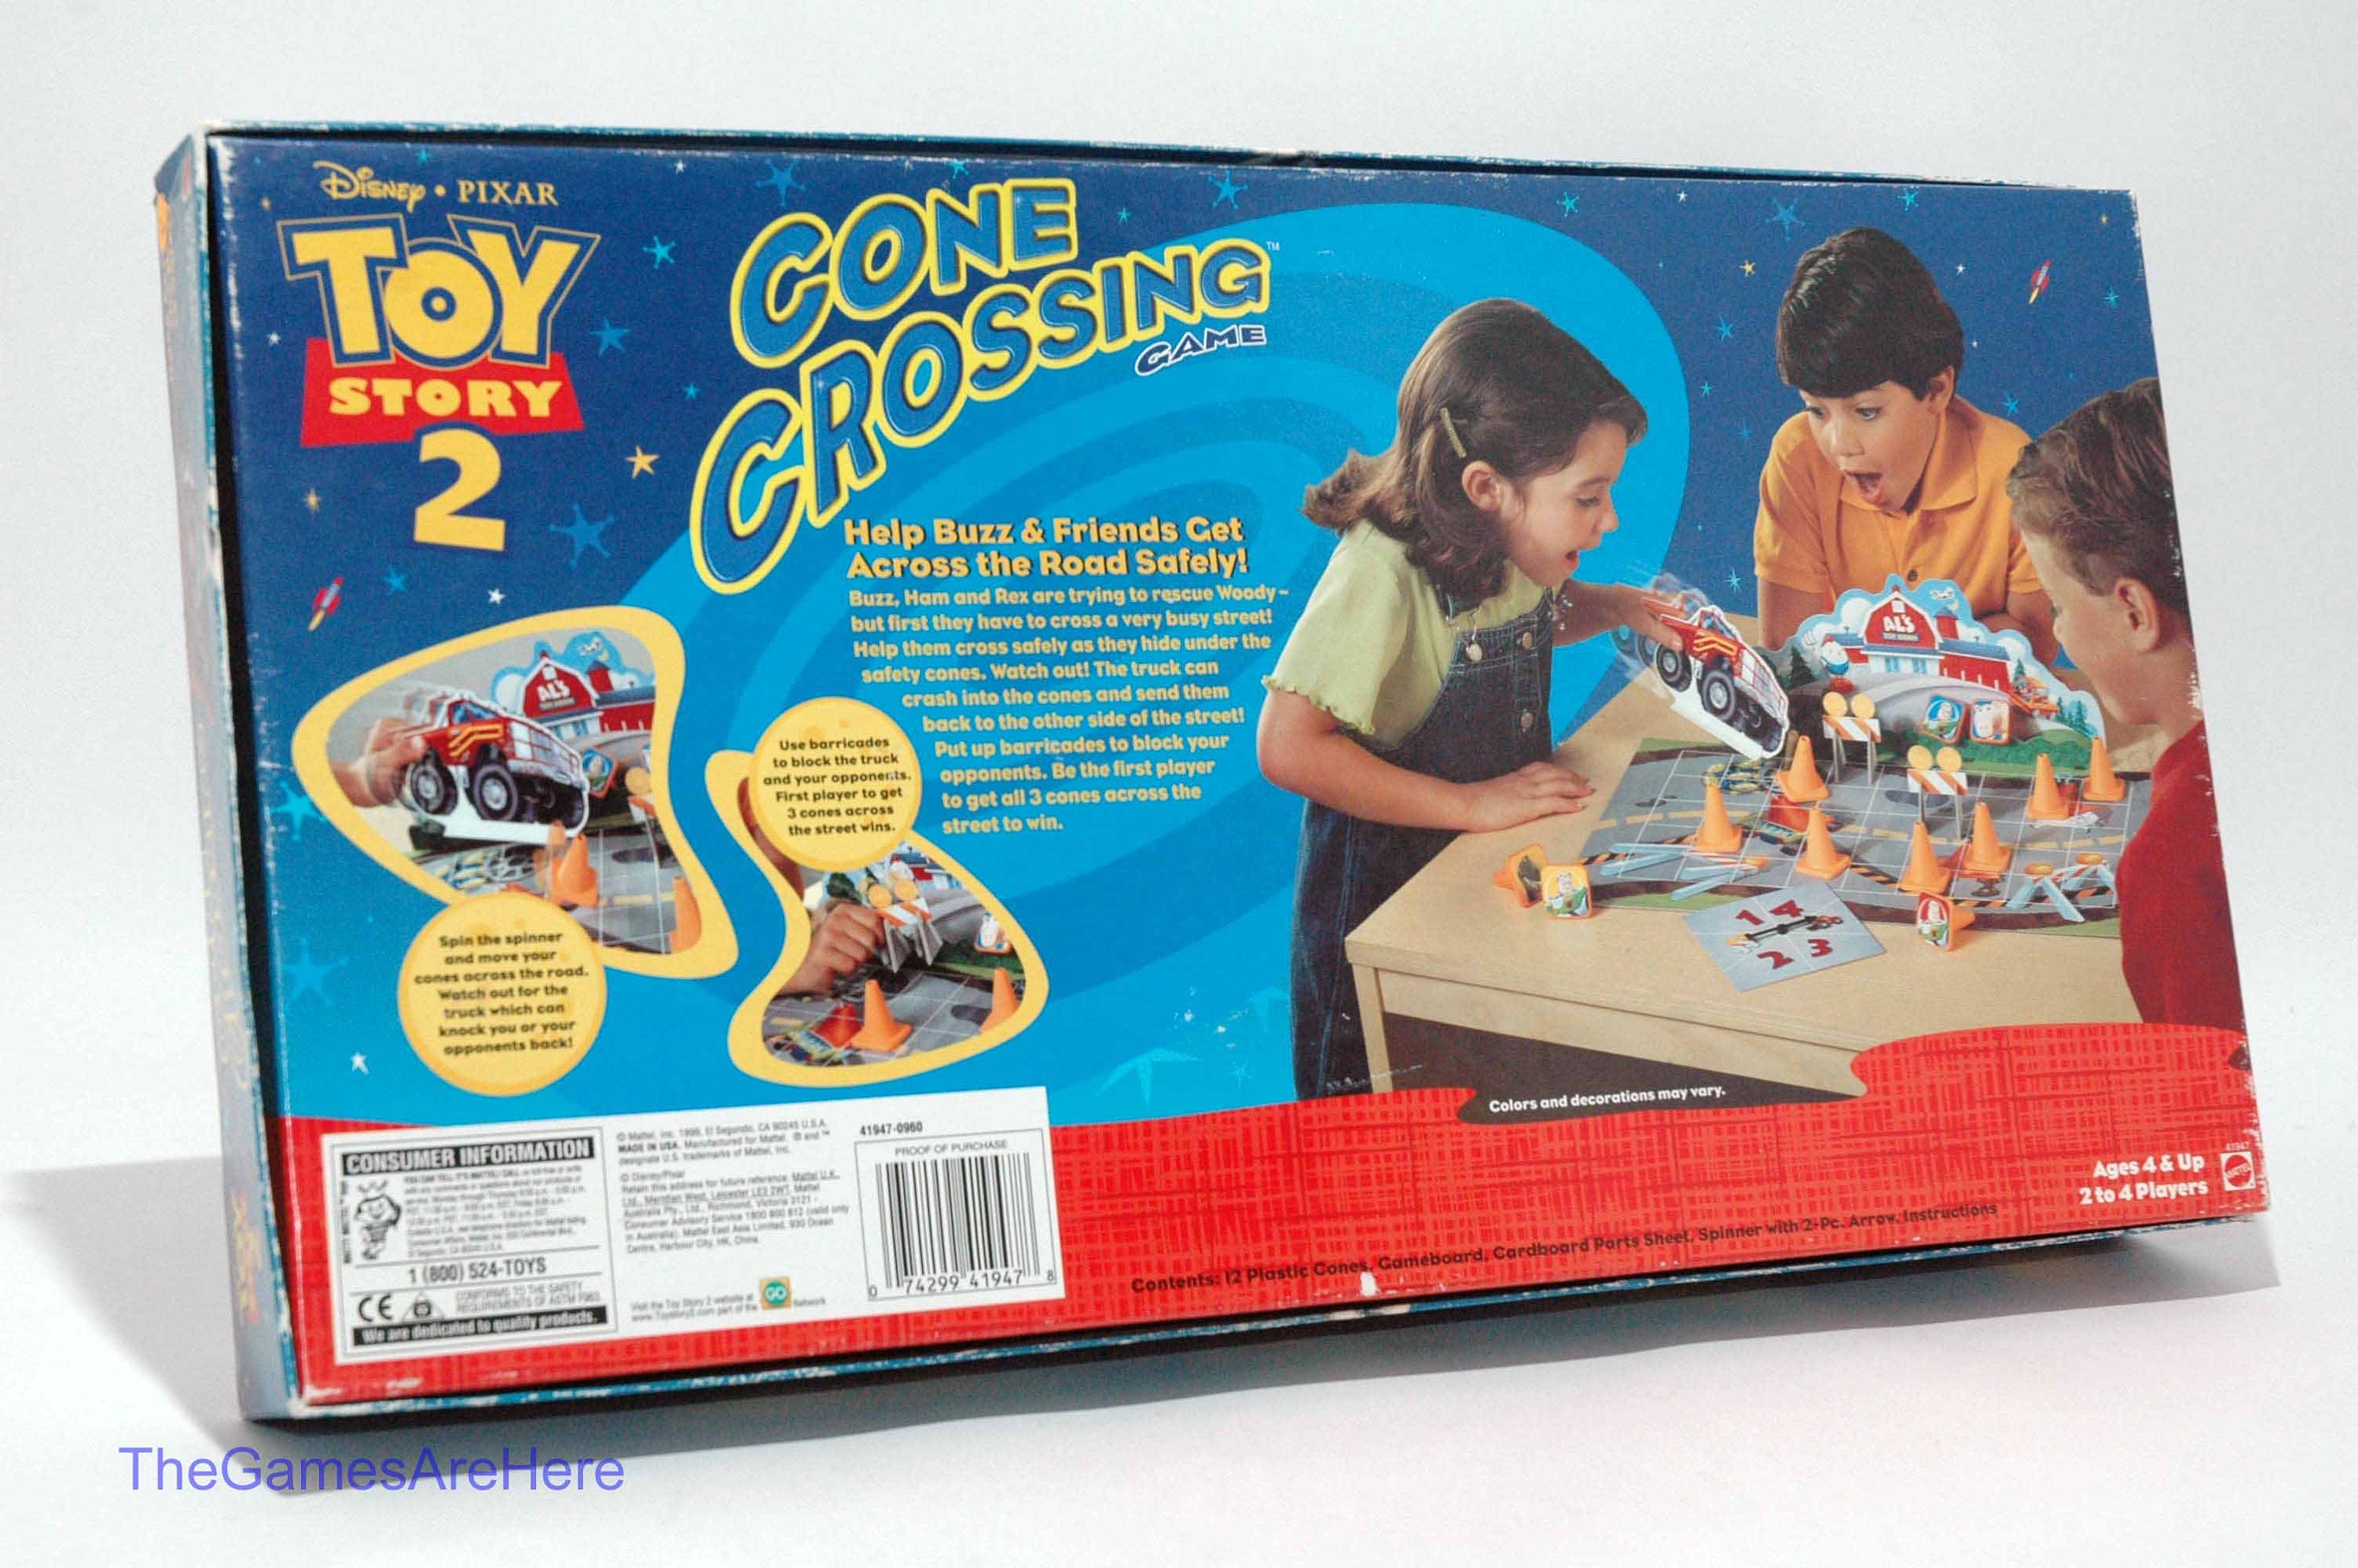 Vintage Toy Story 2: Cone Crossing Game by Mattel - 1999 Edition -  Complete!